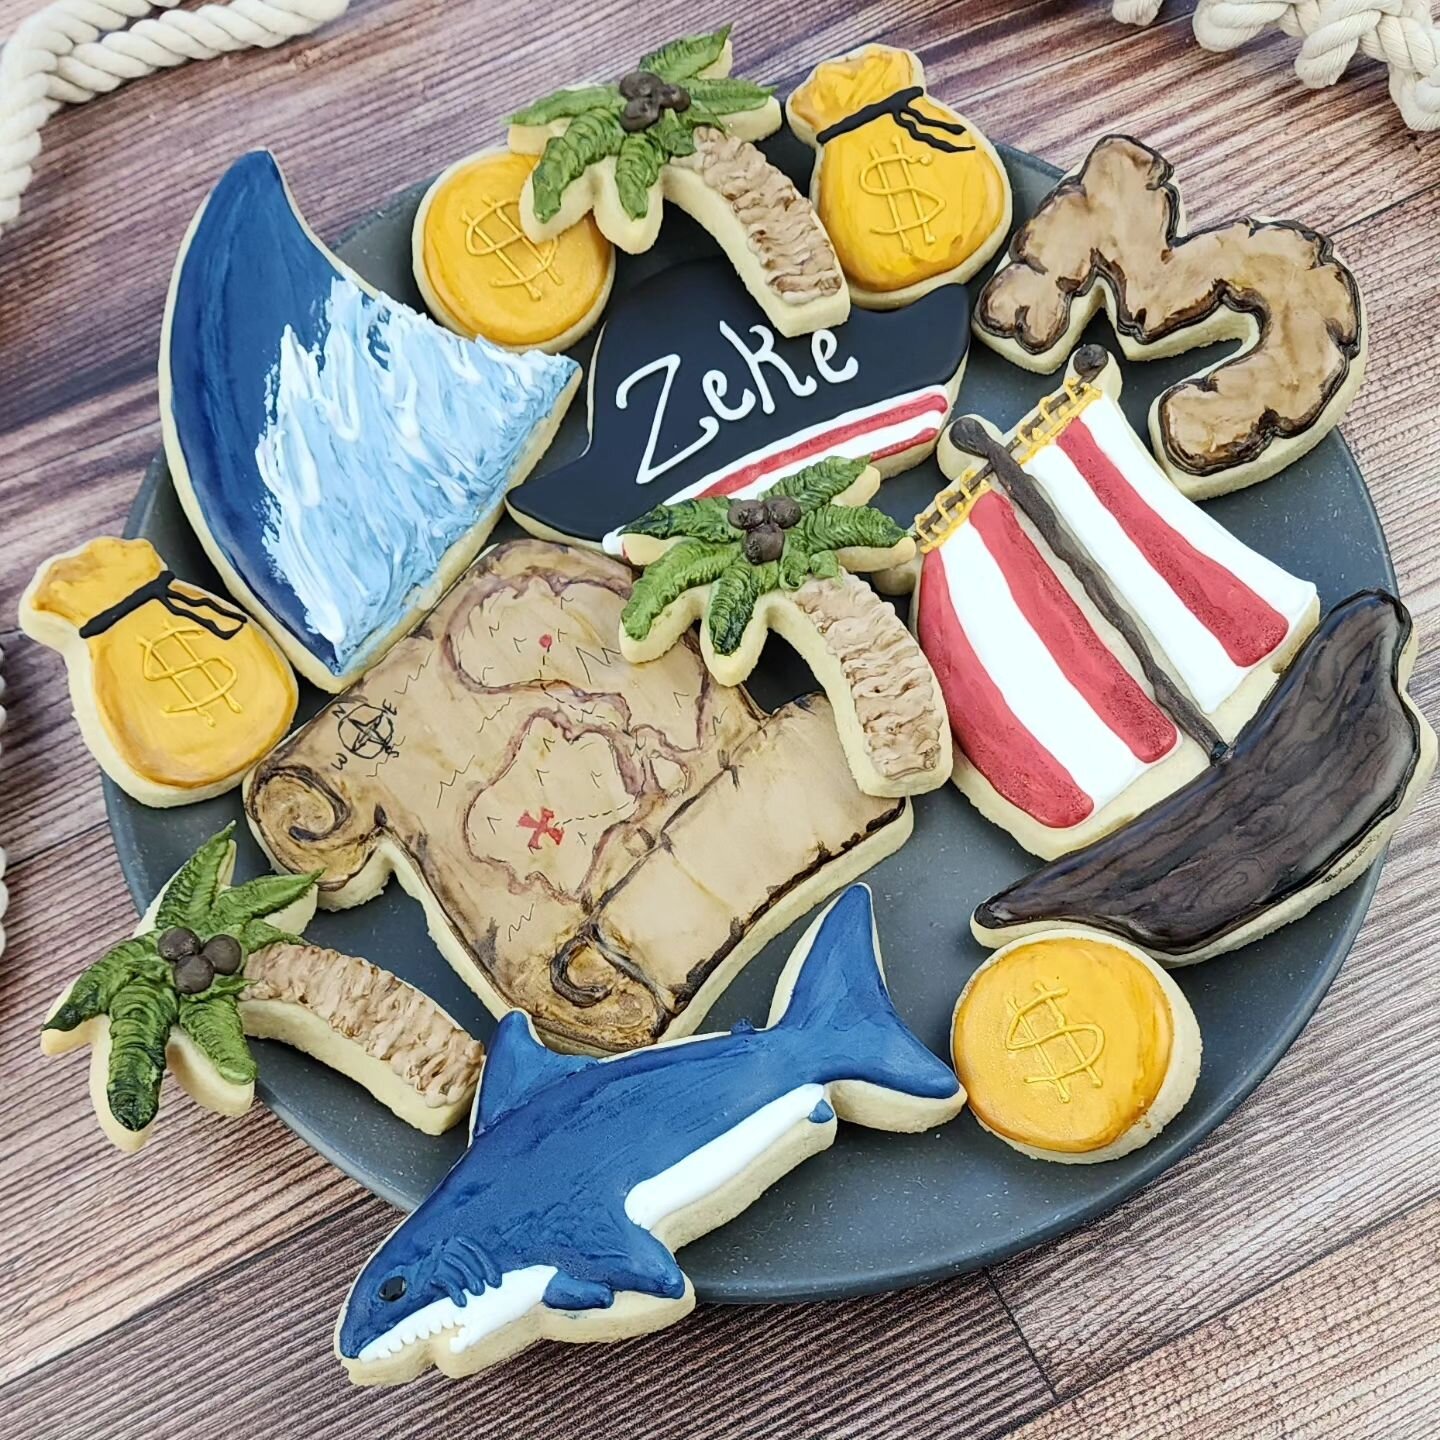 Made some pirates with sharks cookies for my friend's son, who just turned 3. I had fun with this set and used brushes to add texture. 😊🏴&zwj;☠️🦈